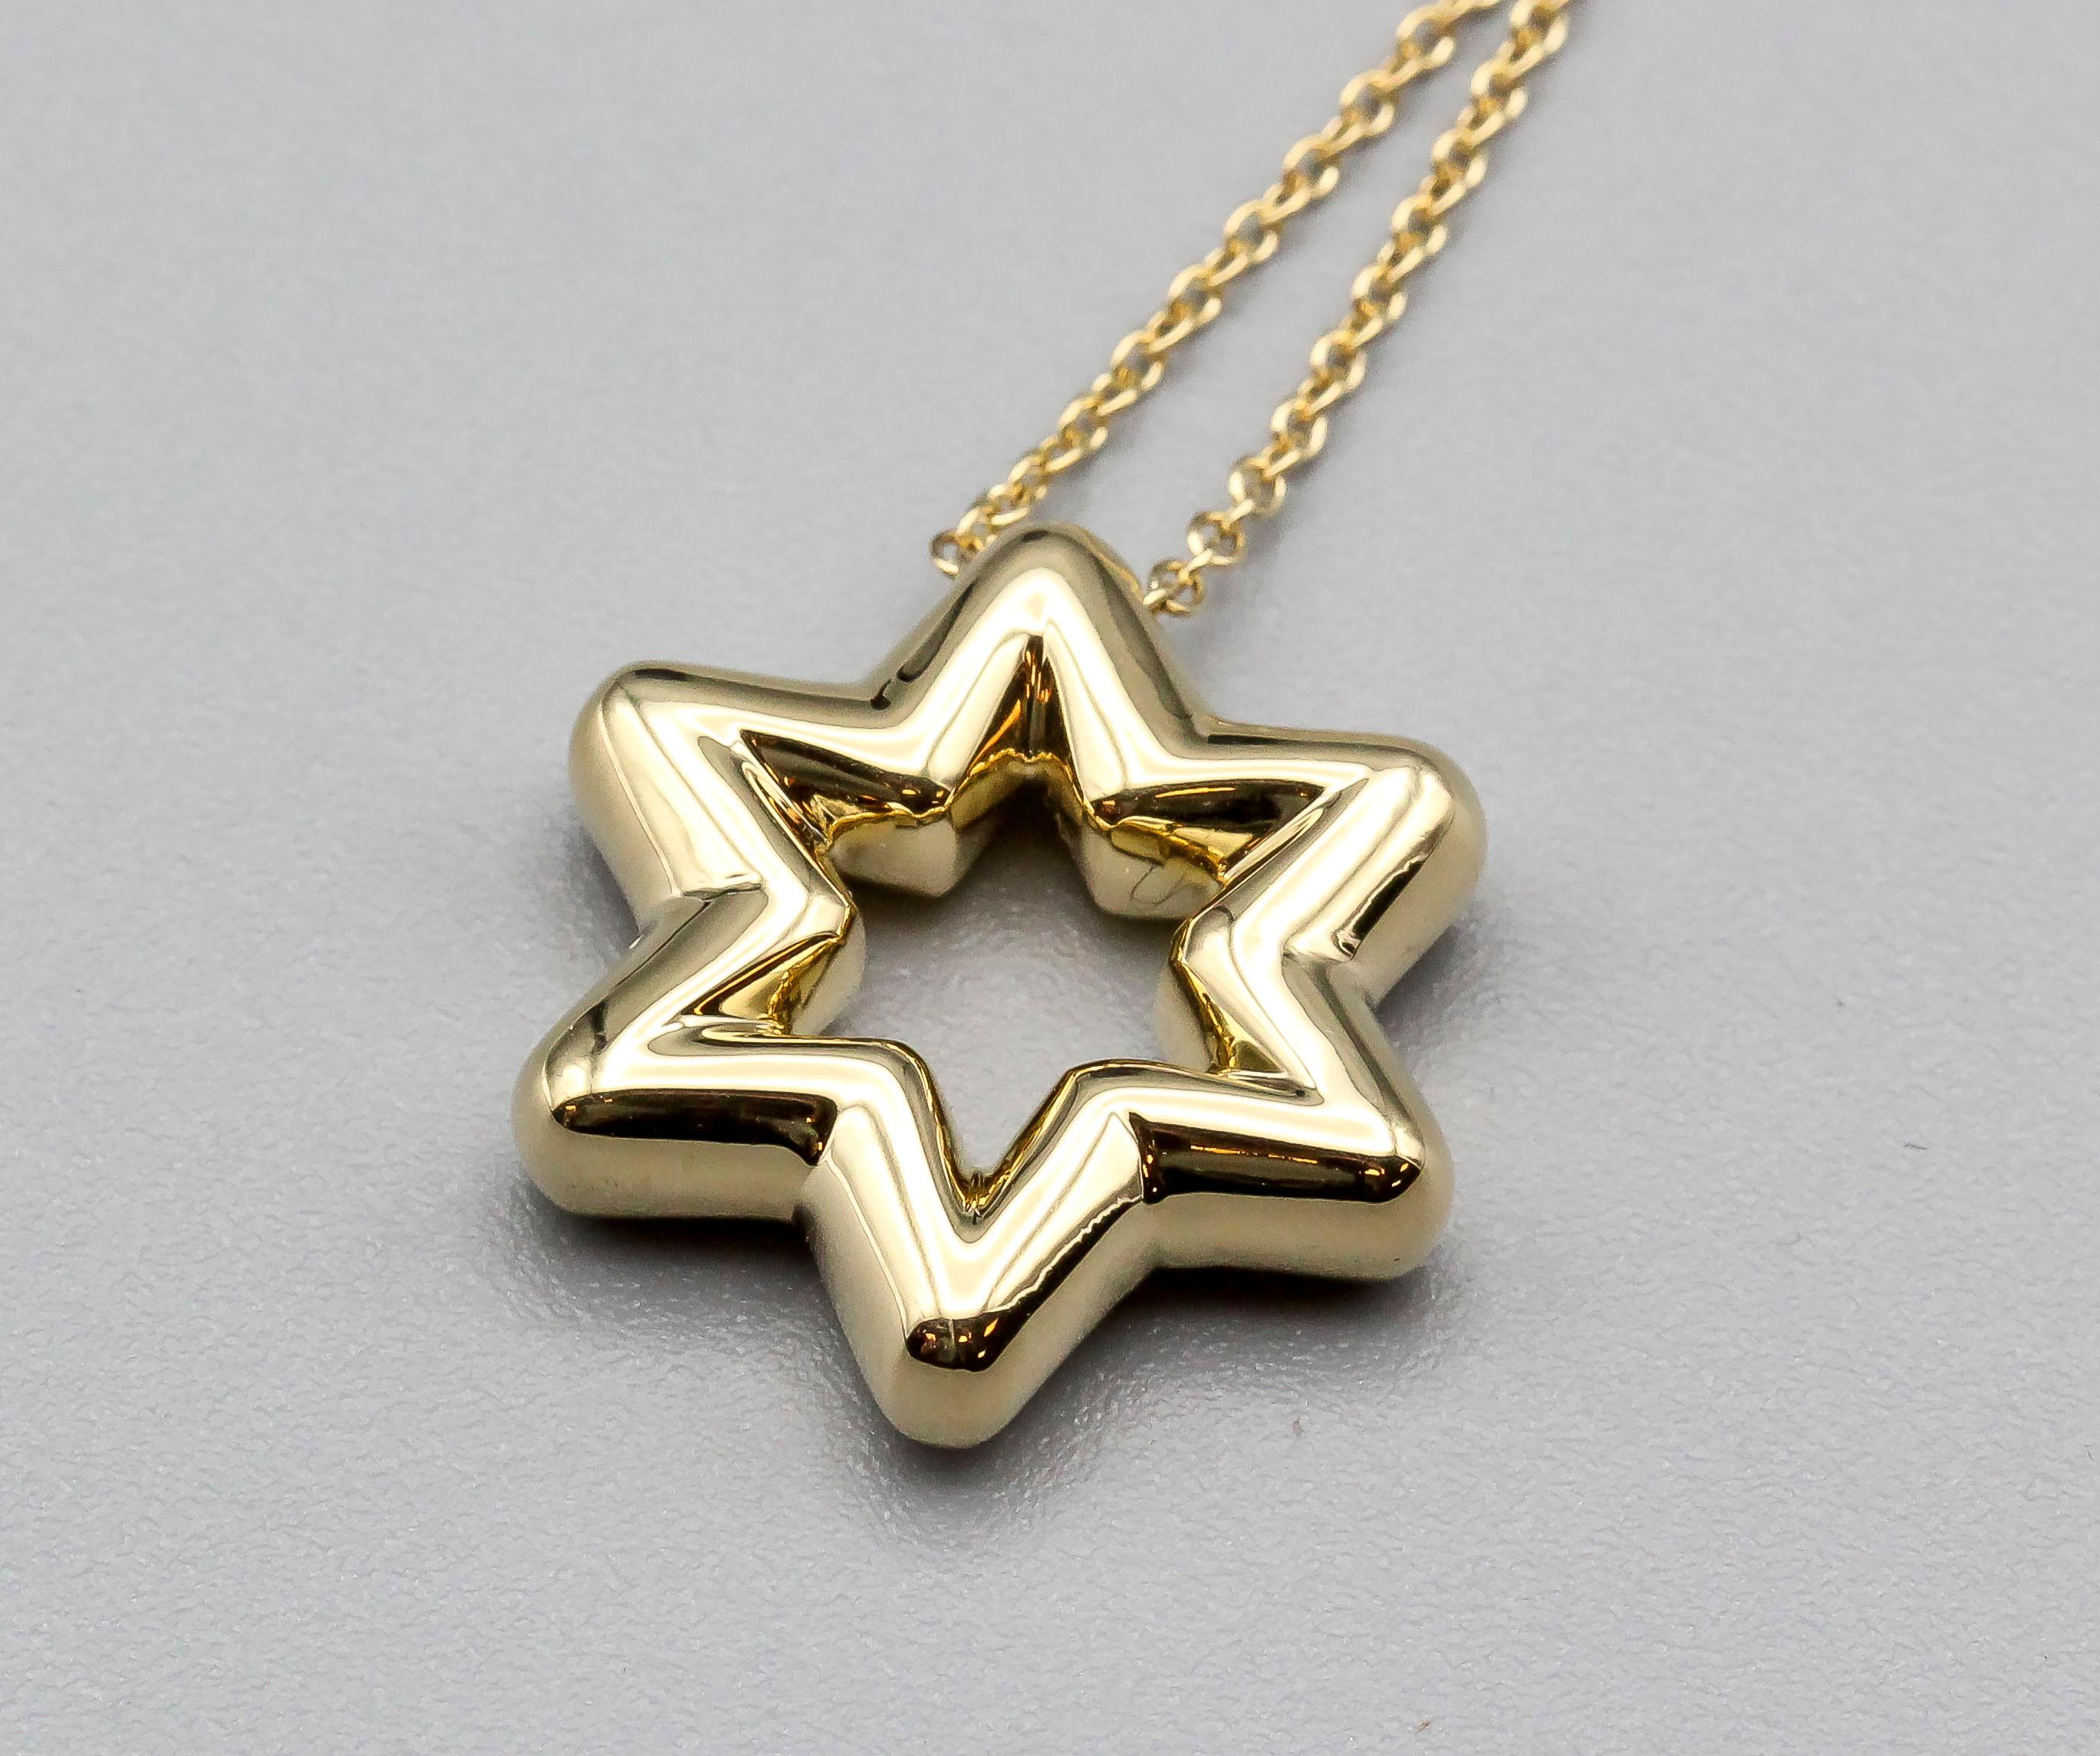 Fine diamond and 18K yellow gold David's Star necklace from the 